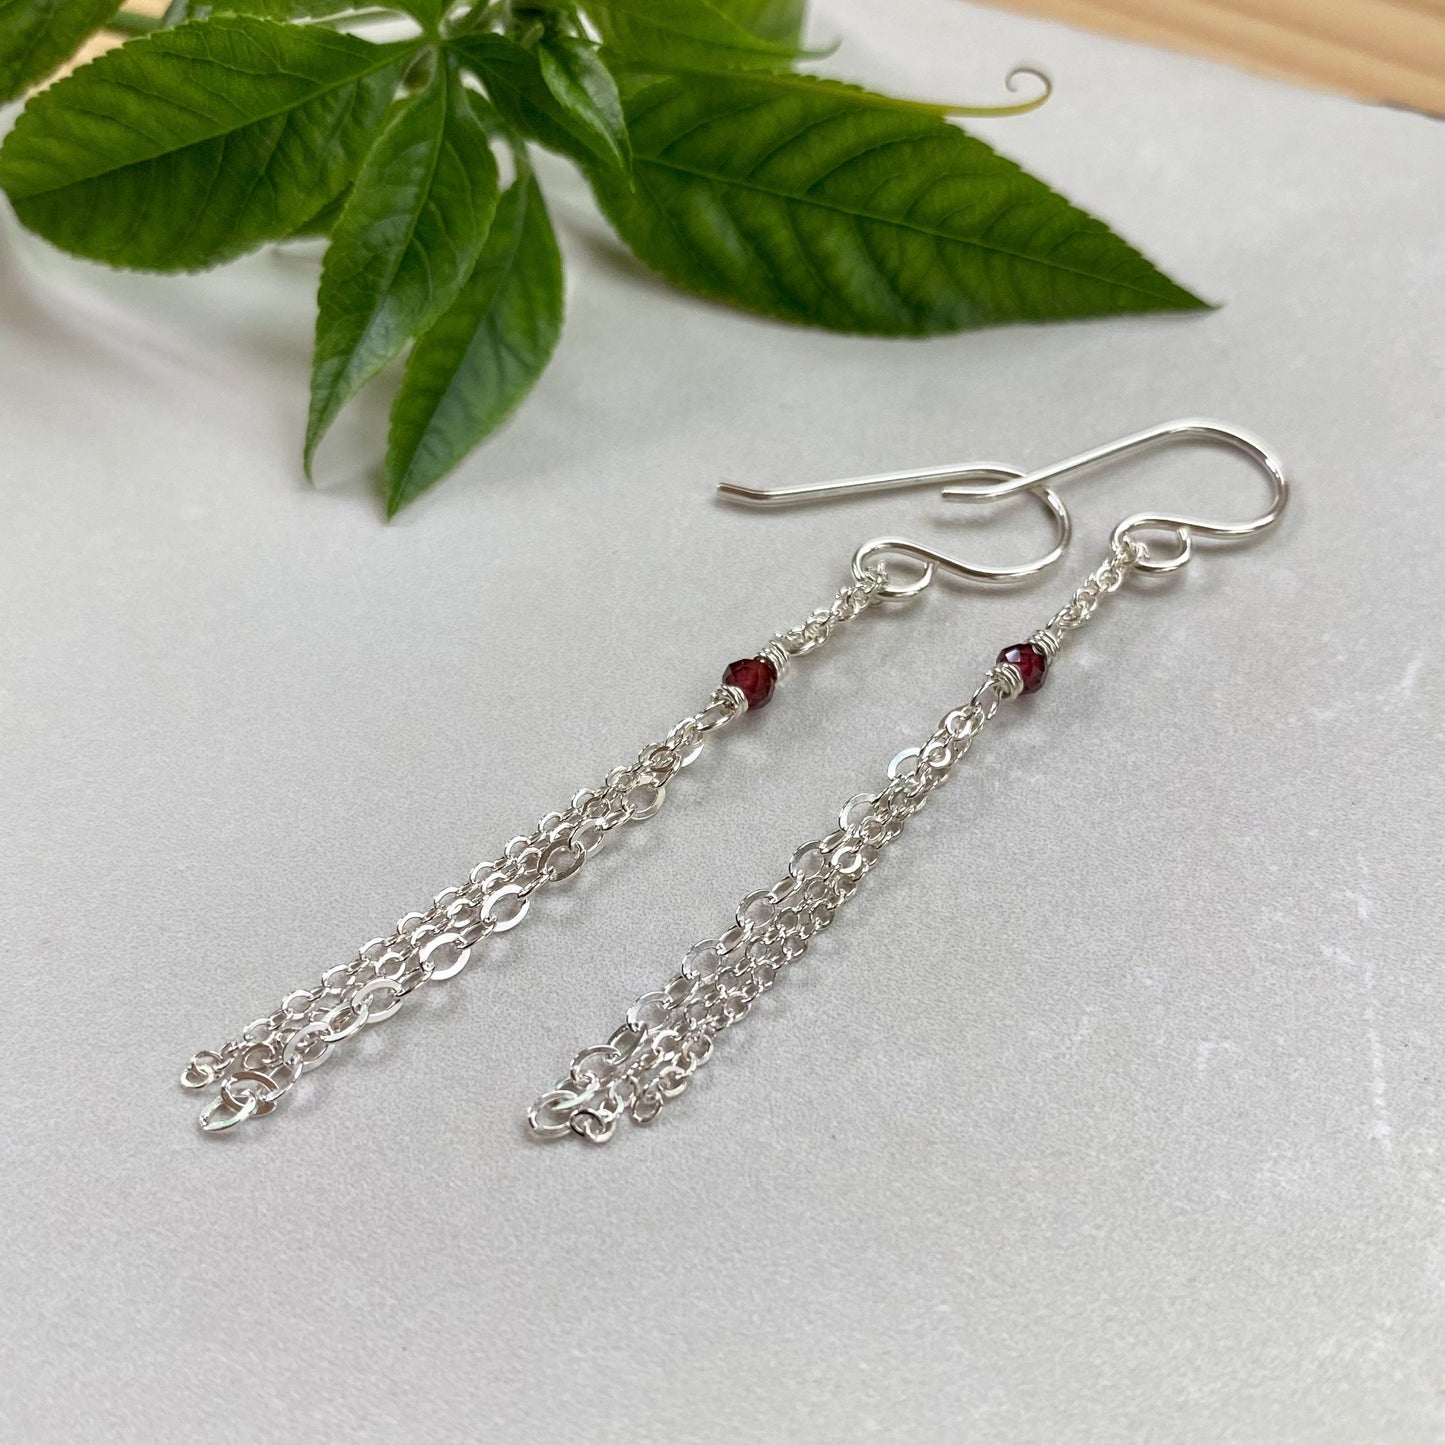 Sterling Silver Fringe Chain Earrings with Birthstone, Elegant Mixed Chain Fringe Dangle Drop, Handcrafted Birthday Gift Sister Friend Mom